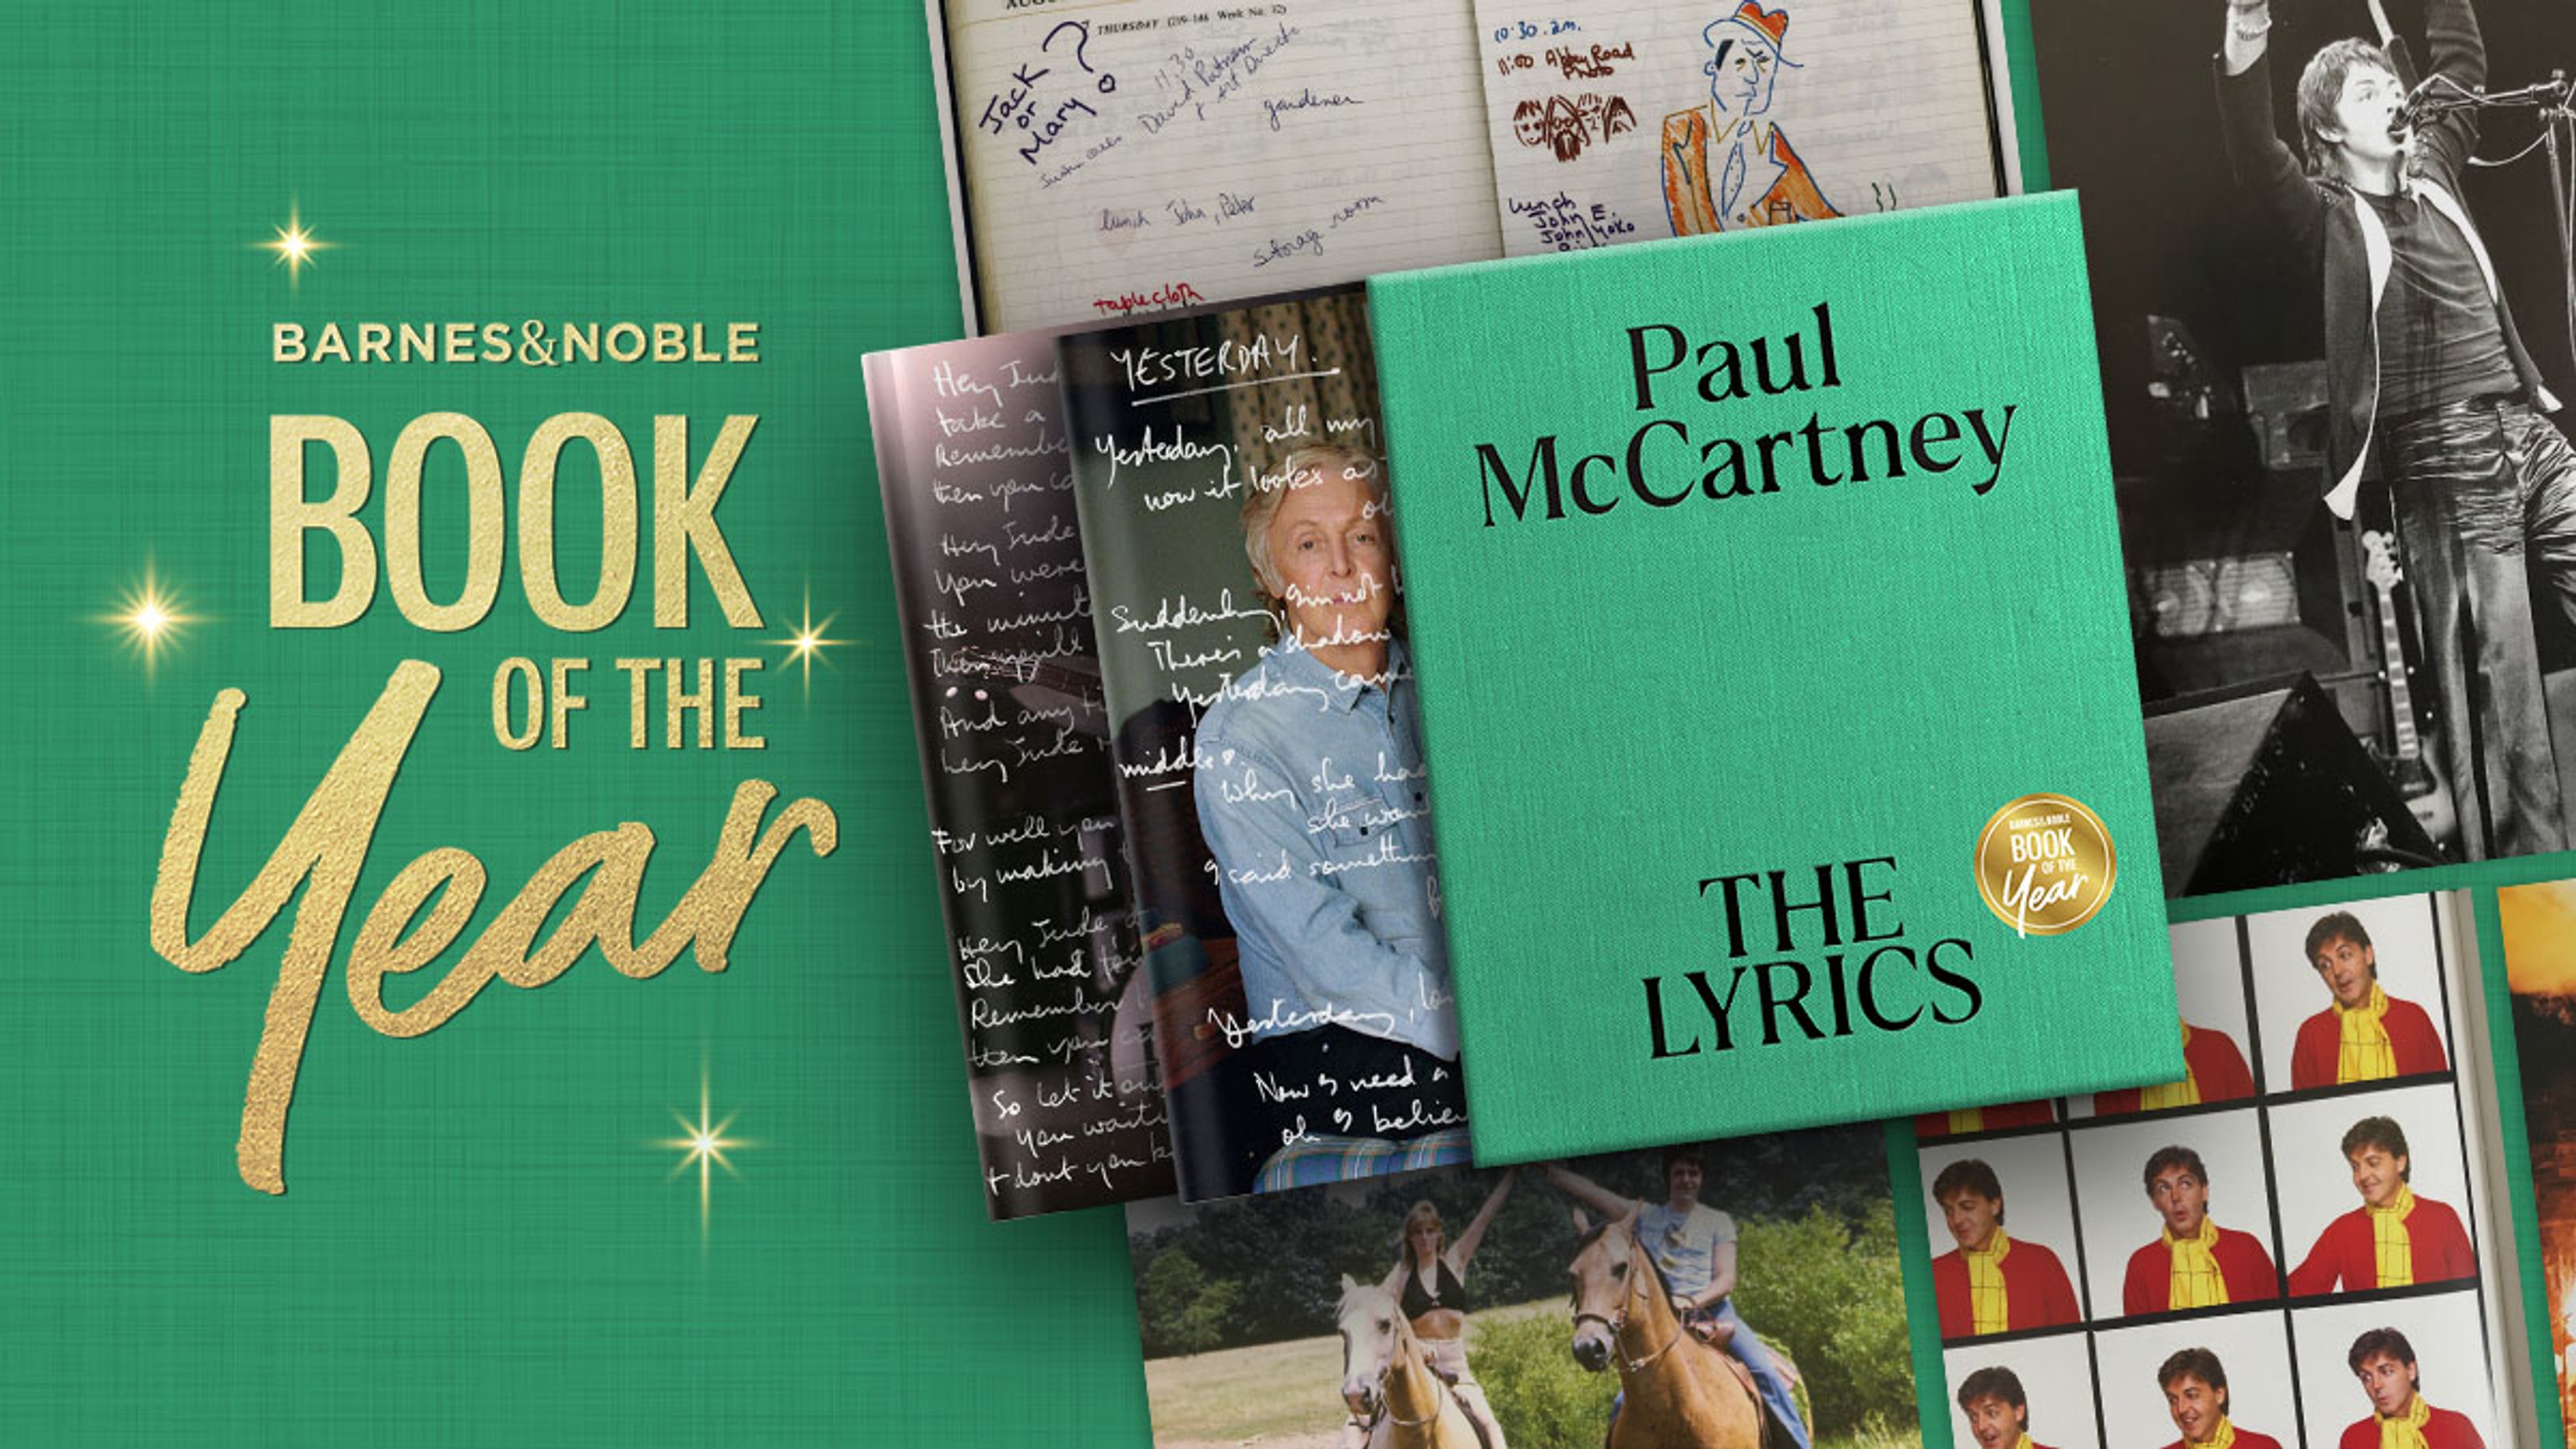 'The Lyrics' is the 2021 Barnes & Noble Book of the Year!